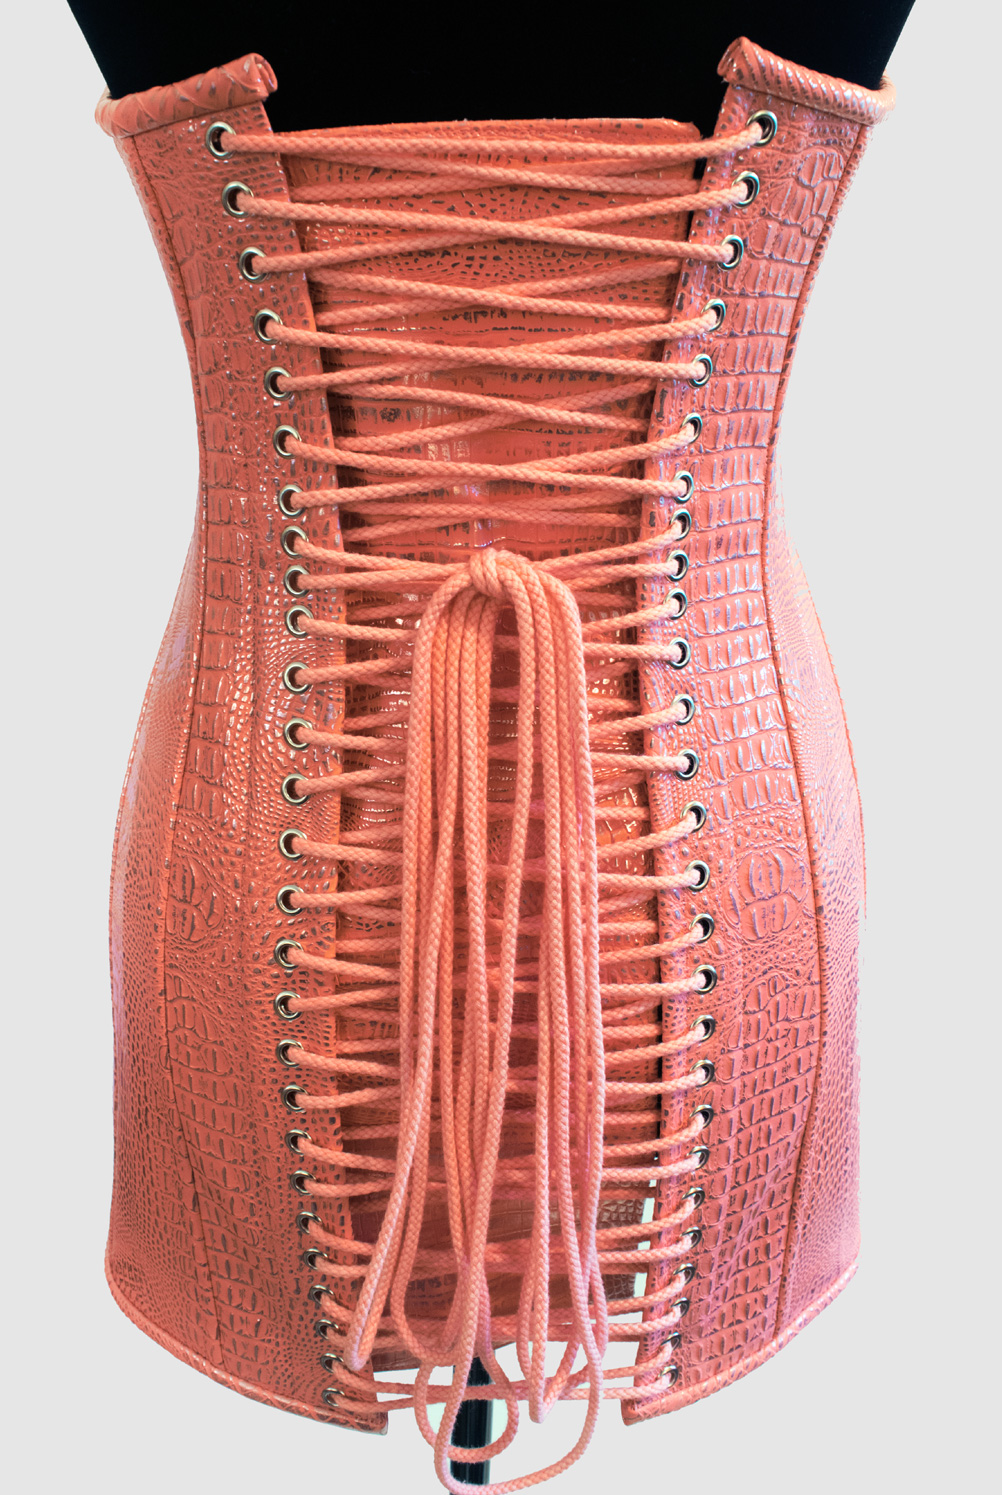 https://www.champagnecorsets.com/wp-content/uploads/2019/04/The-Skinny-Confidential-Underbust-Corset-Dress-3-R2.jpg